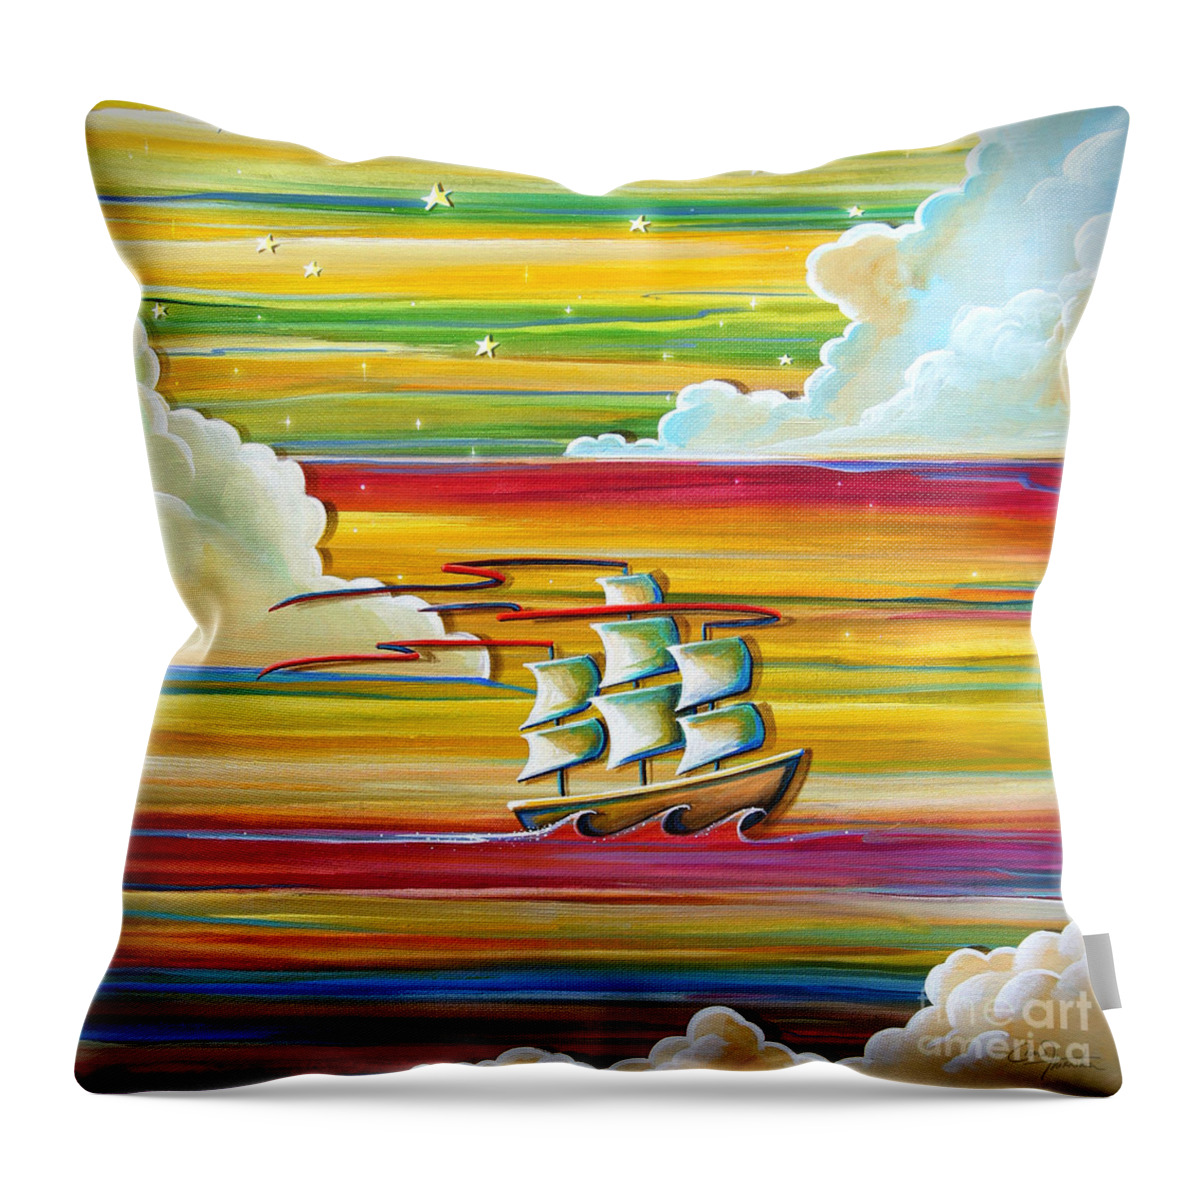 Sky Throw Pillow featuring the painting Off To Neverland by Cindy Thornton